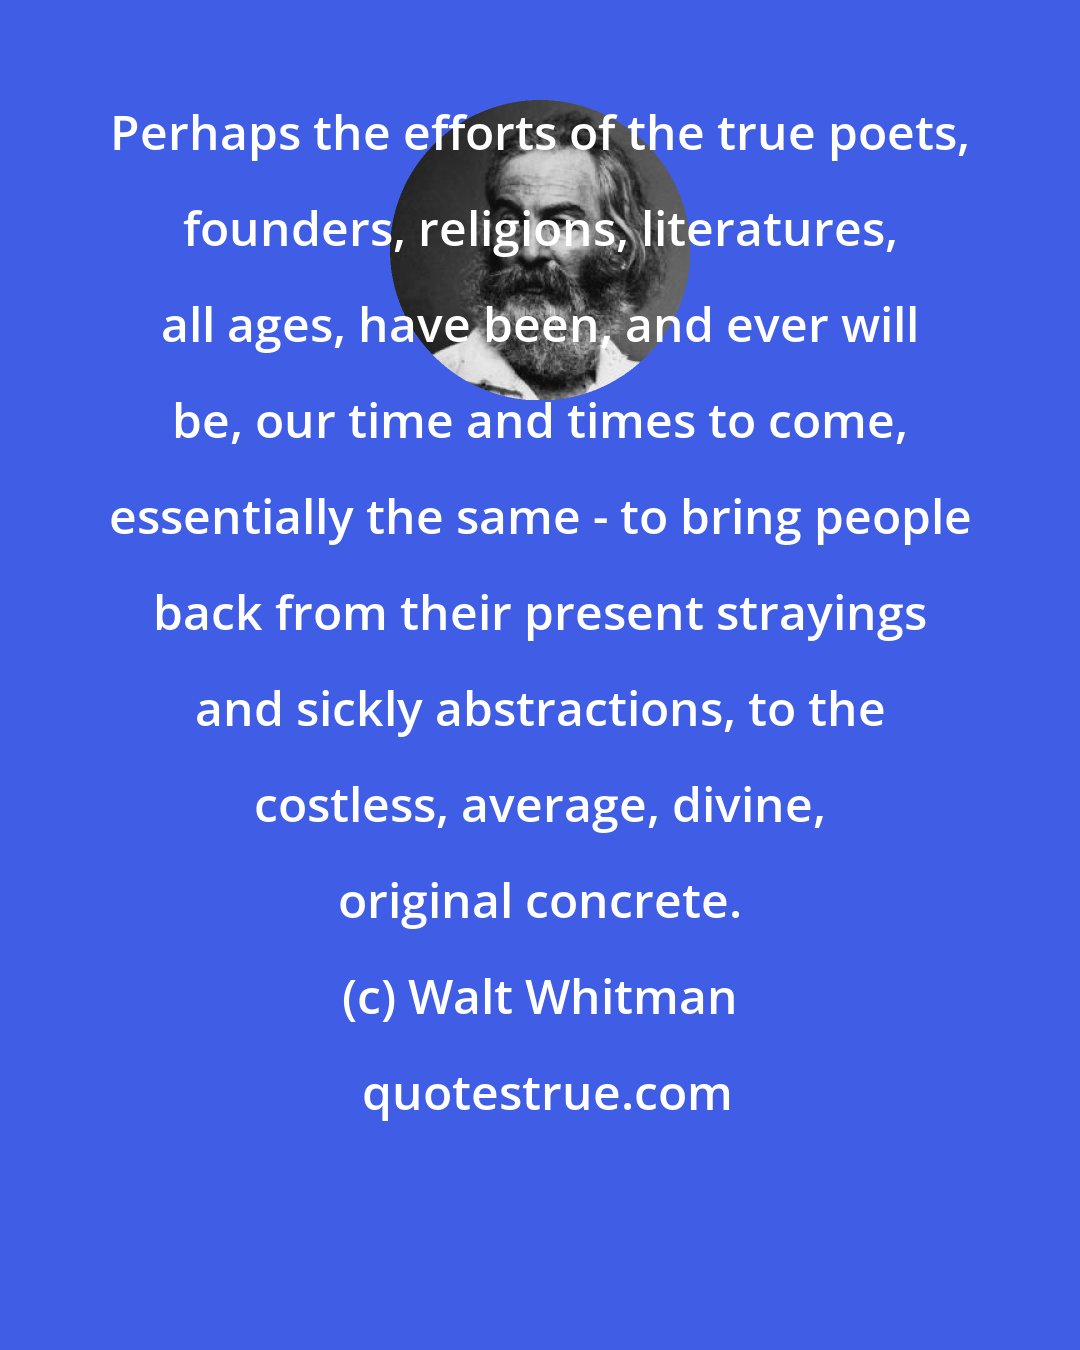 Walt Whitman: Perhaps the efforts of the true poets, founders, religions, literatures, all ages, have been, and ever will be, our time and times to come, essentially the same - to bring people back from their present strayings and sickly abstractions, to the costless, average, divine, original concrete.